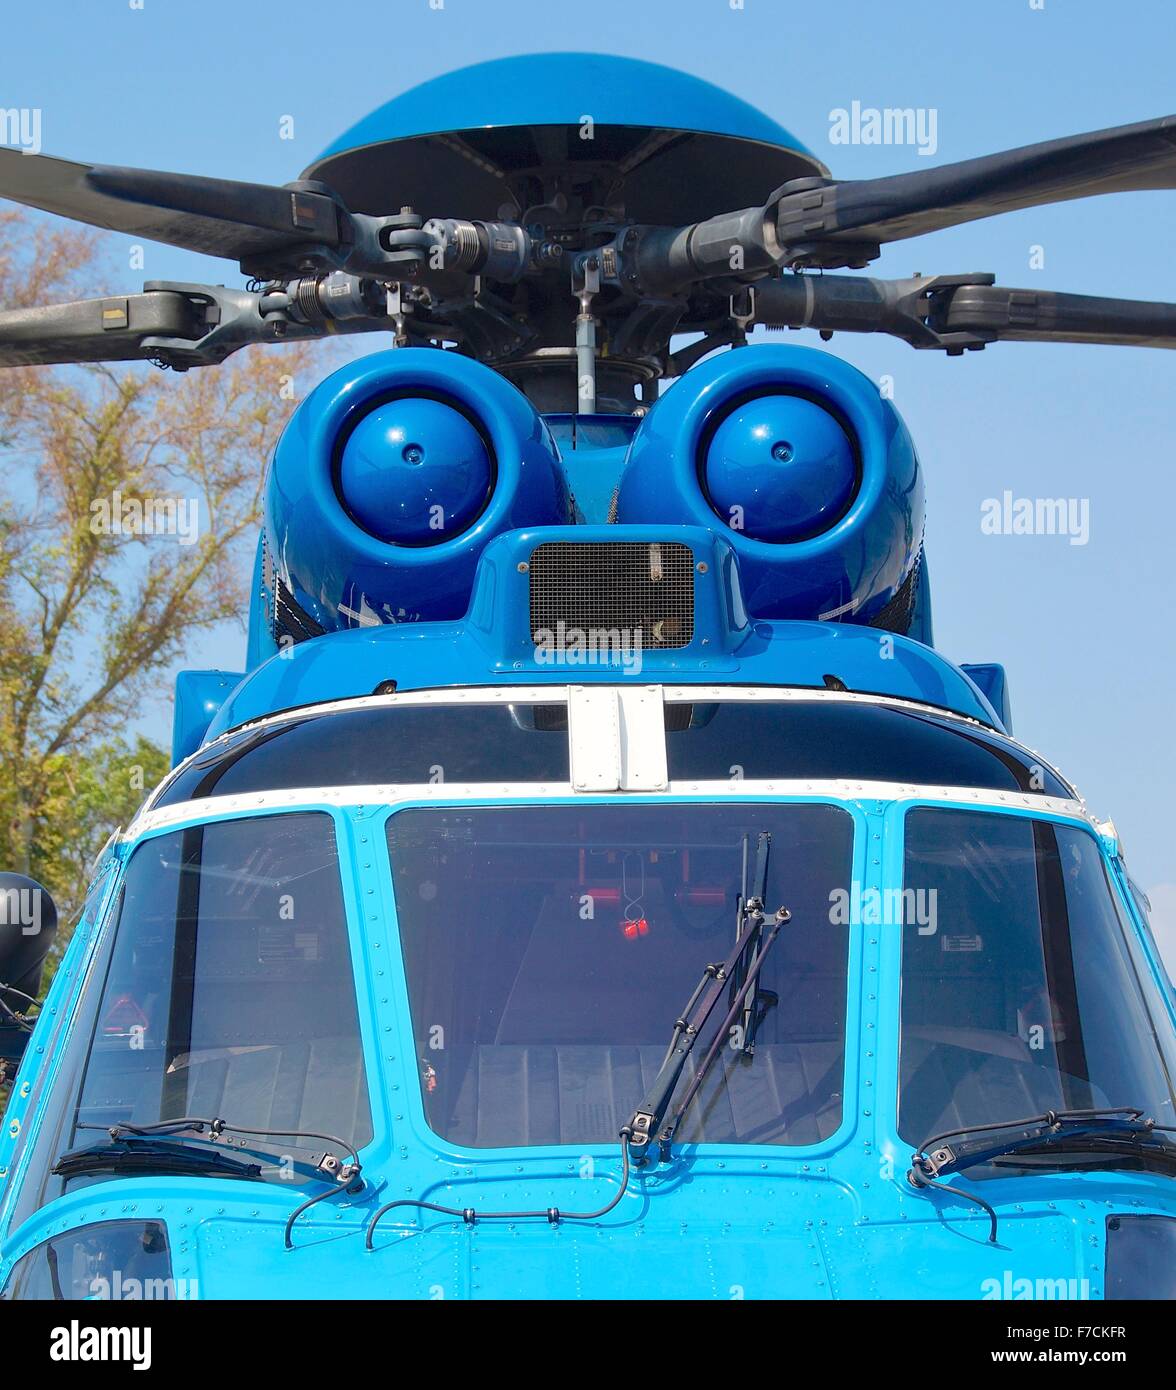 EC-225 helicopter for opening to visitors at Kaohsiung Navy Headquarters in Taiwan. On Oct 24, 2015 Stock Photo